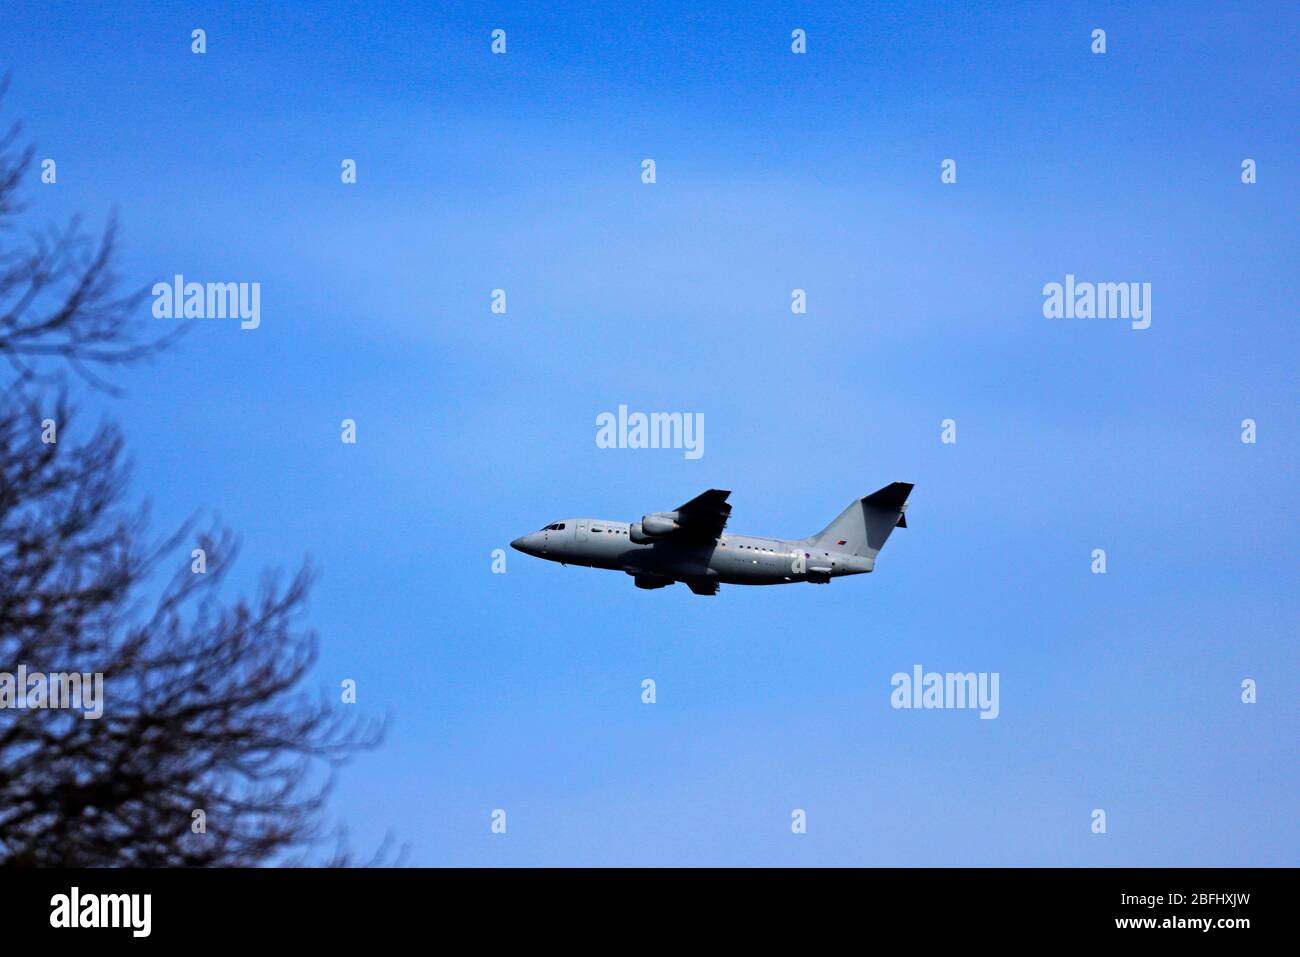 A Royal Air Force BAE146 Command Support Aircraft after take-off from Norwich International Airport, Norwich, Norfolk, England, UK, Europe. Stock Photo